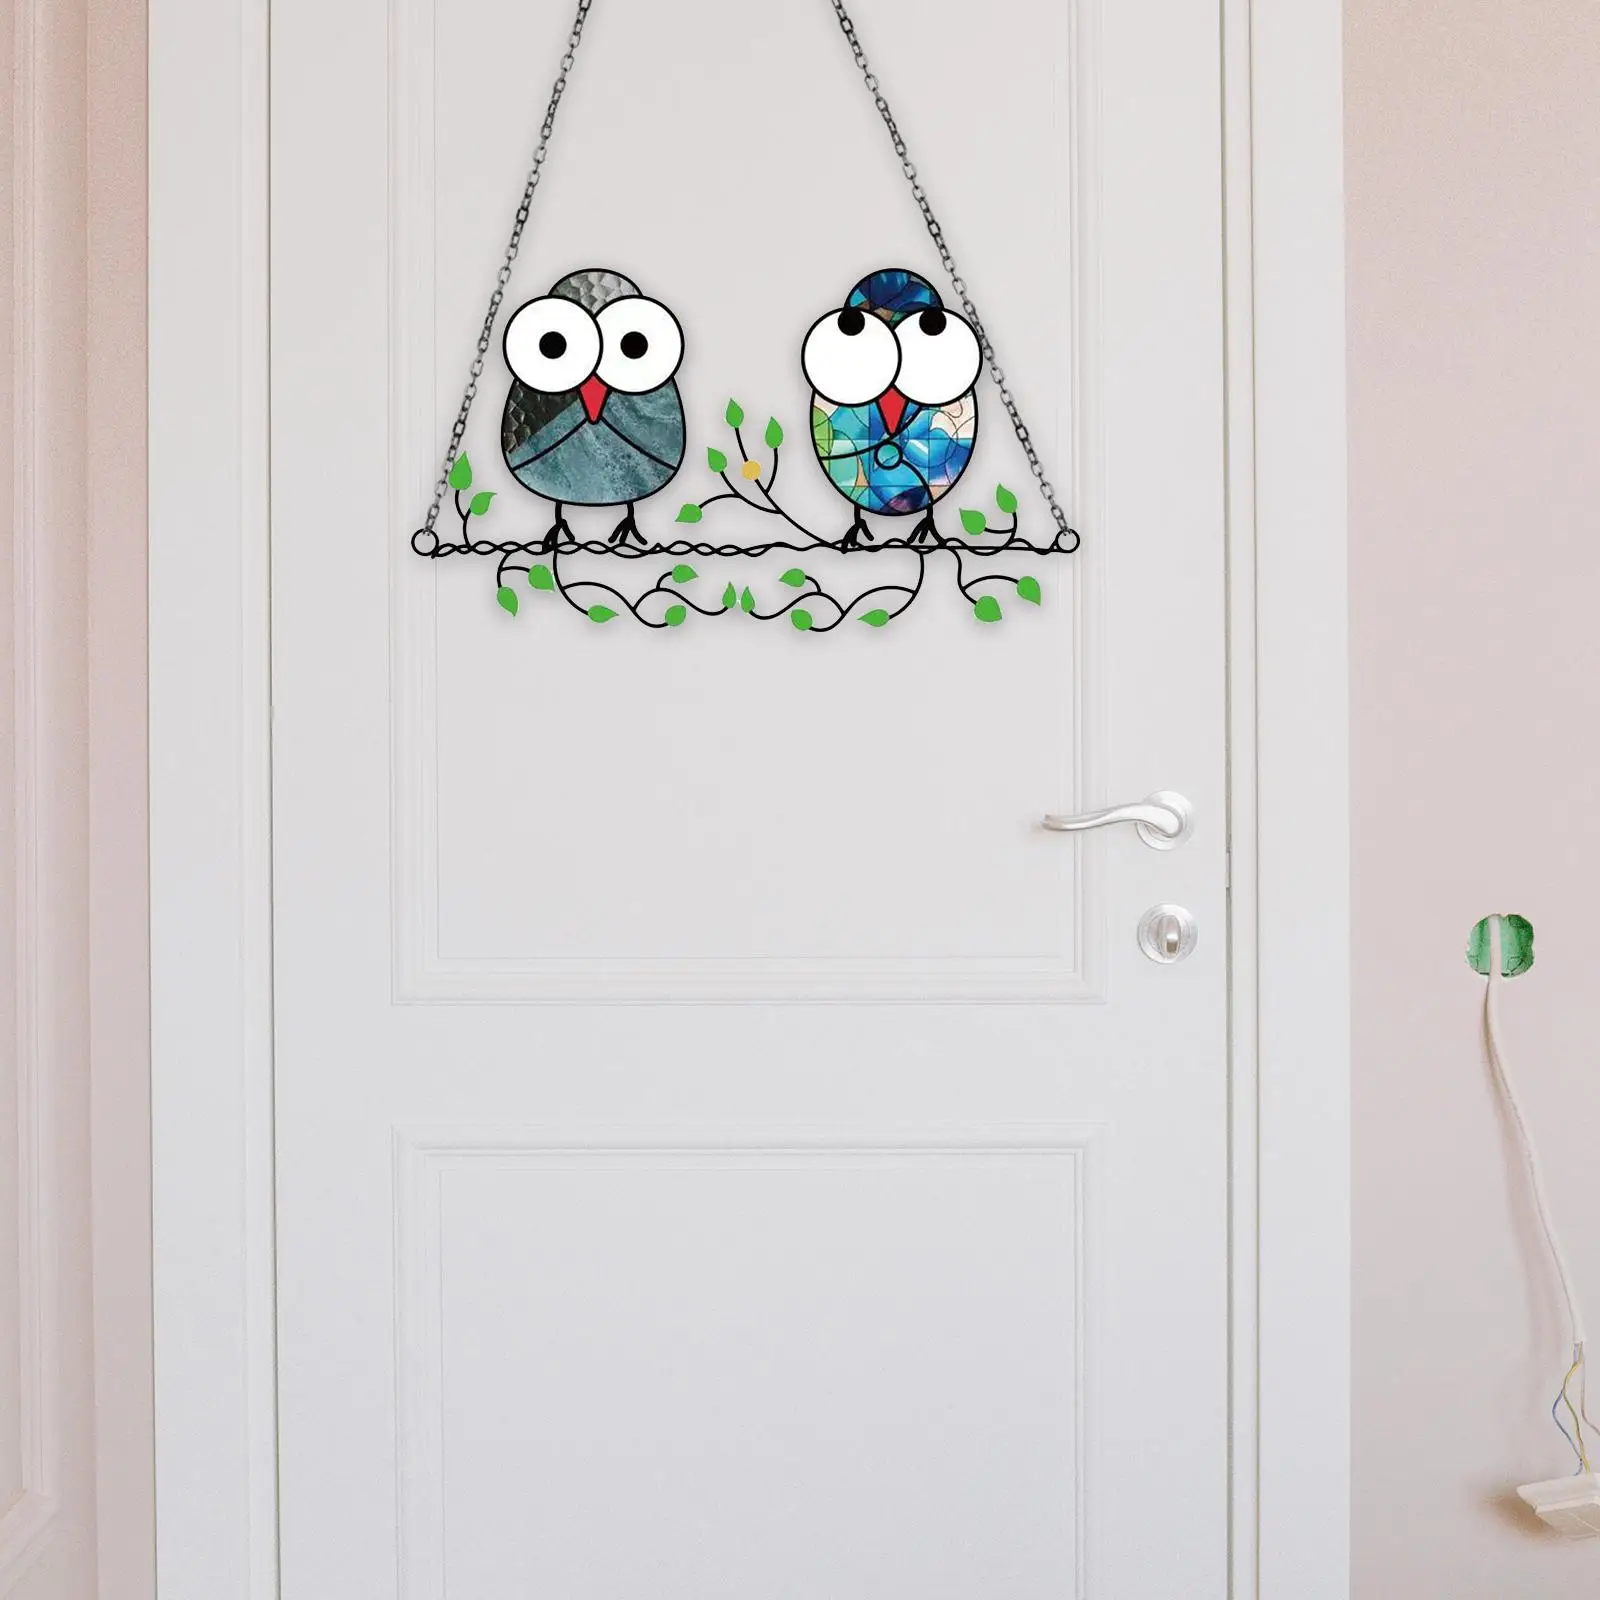 Owl Bird Catchers Shabby Chic Vintage Acrylic Stained Hanging Gift